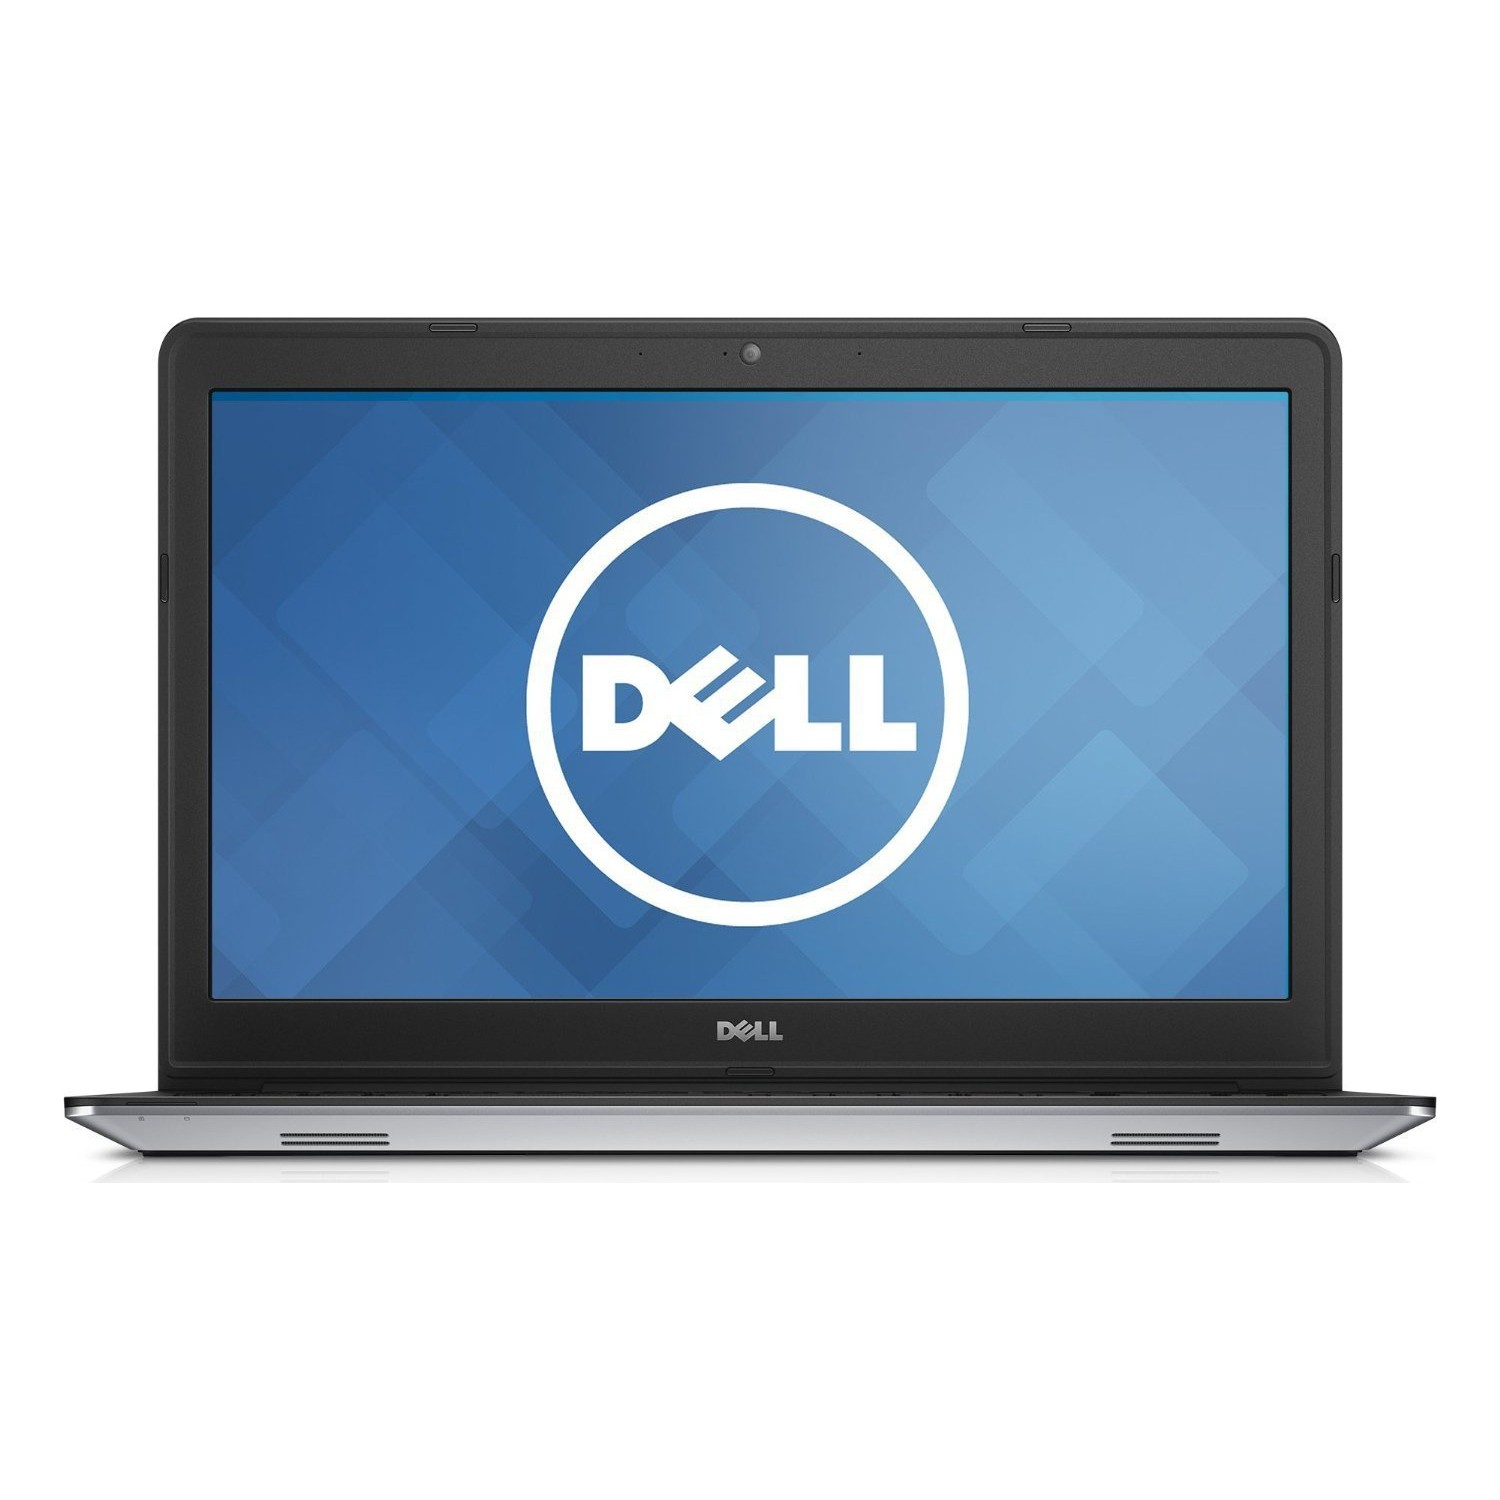 Dell Inspiron 15 7557 Notebook